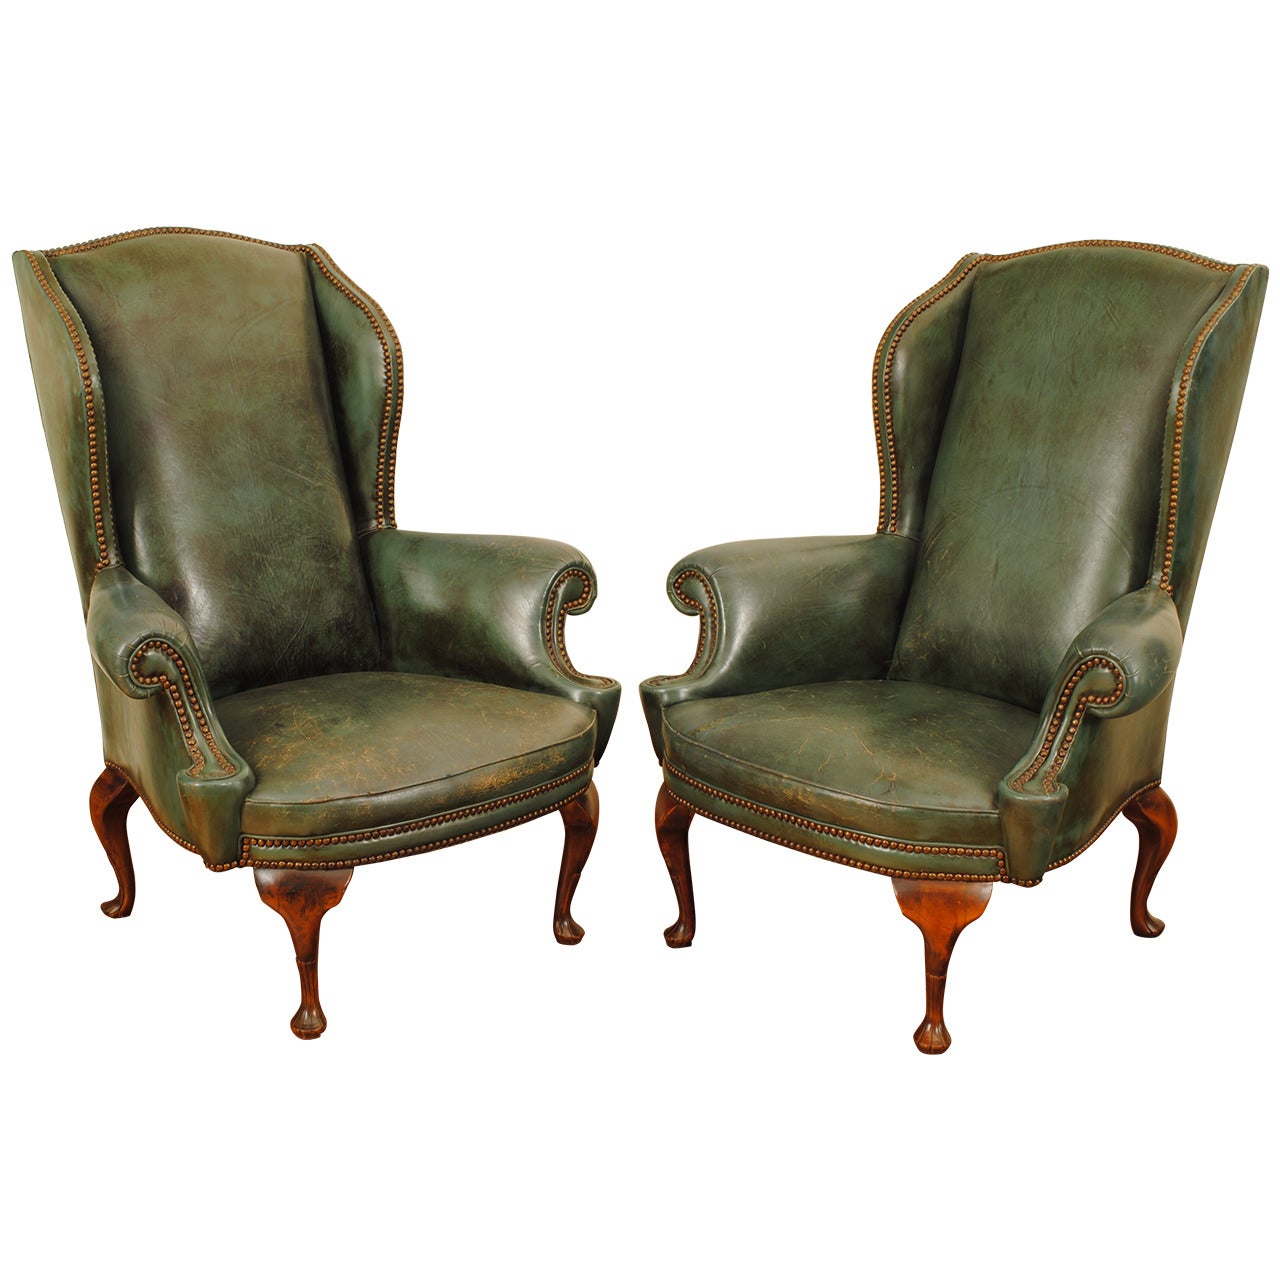 Pair of Italian Queen Anne Style Walnut and Leather Upholstered Wing Chairs